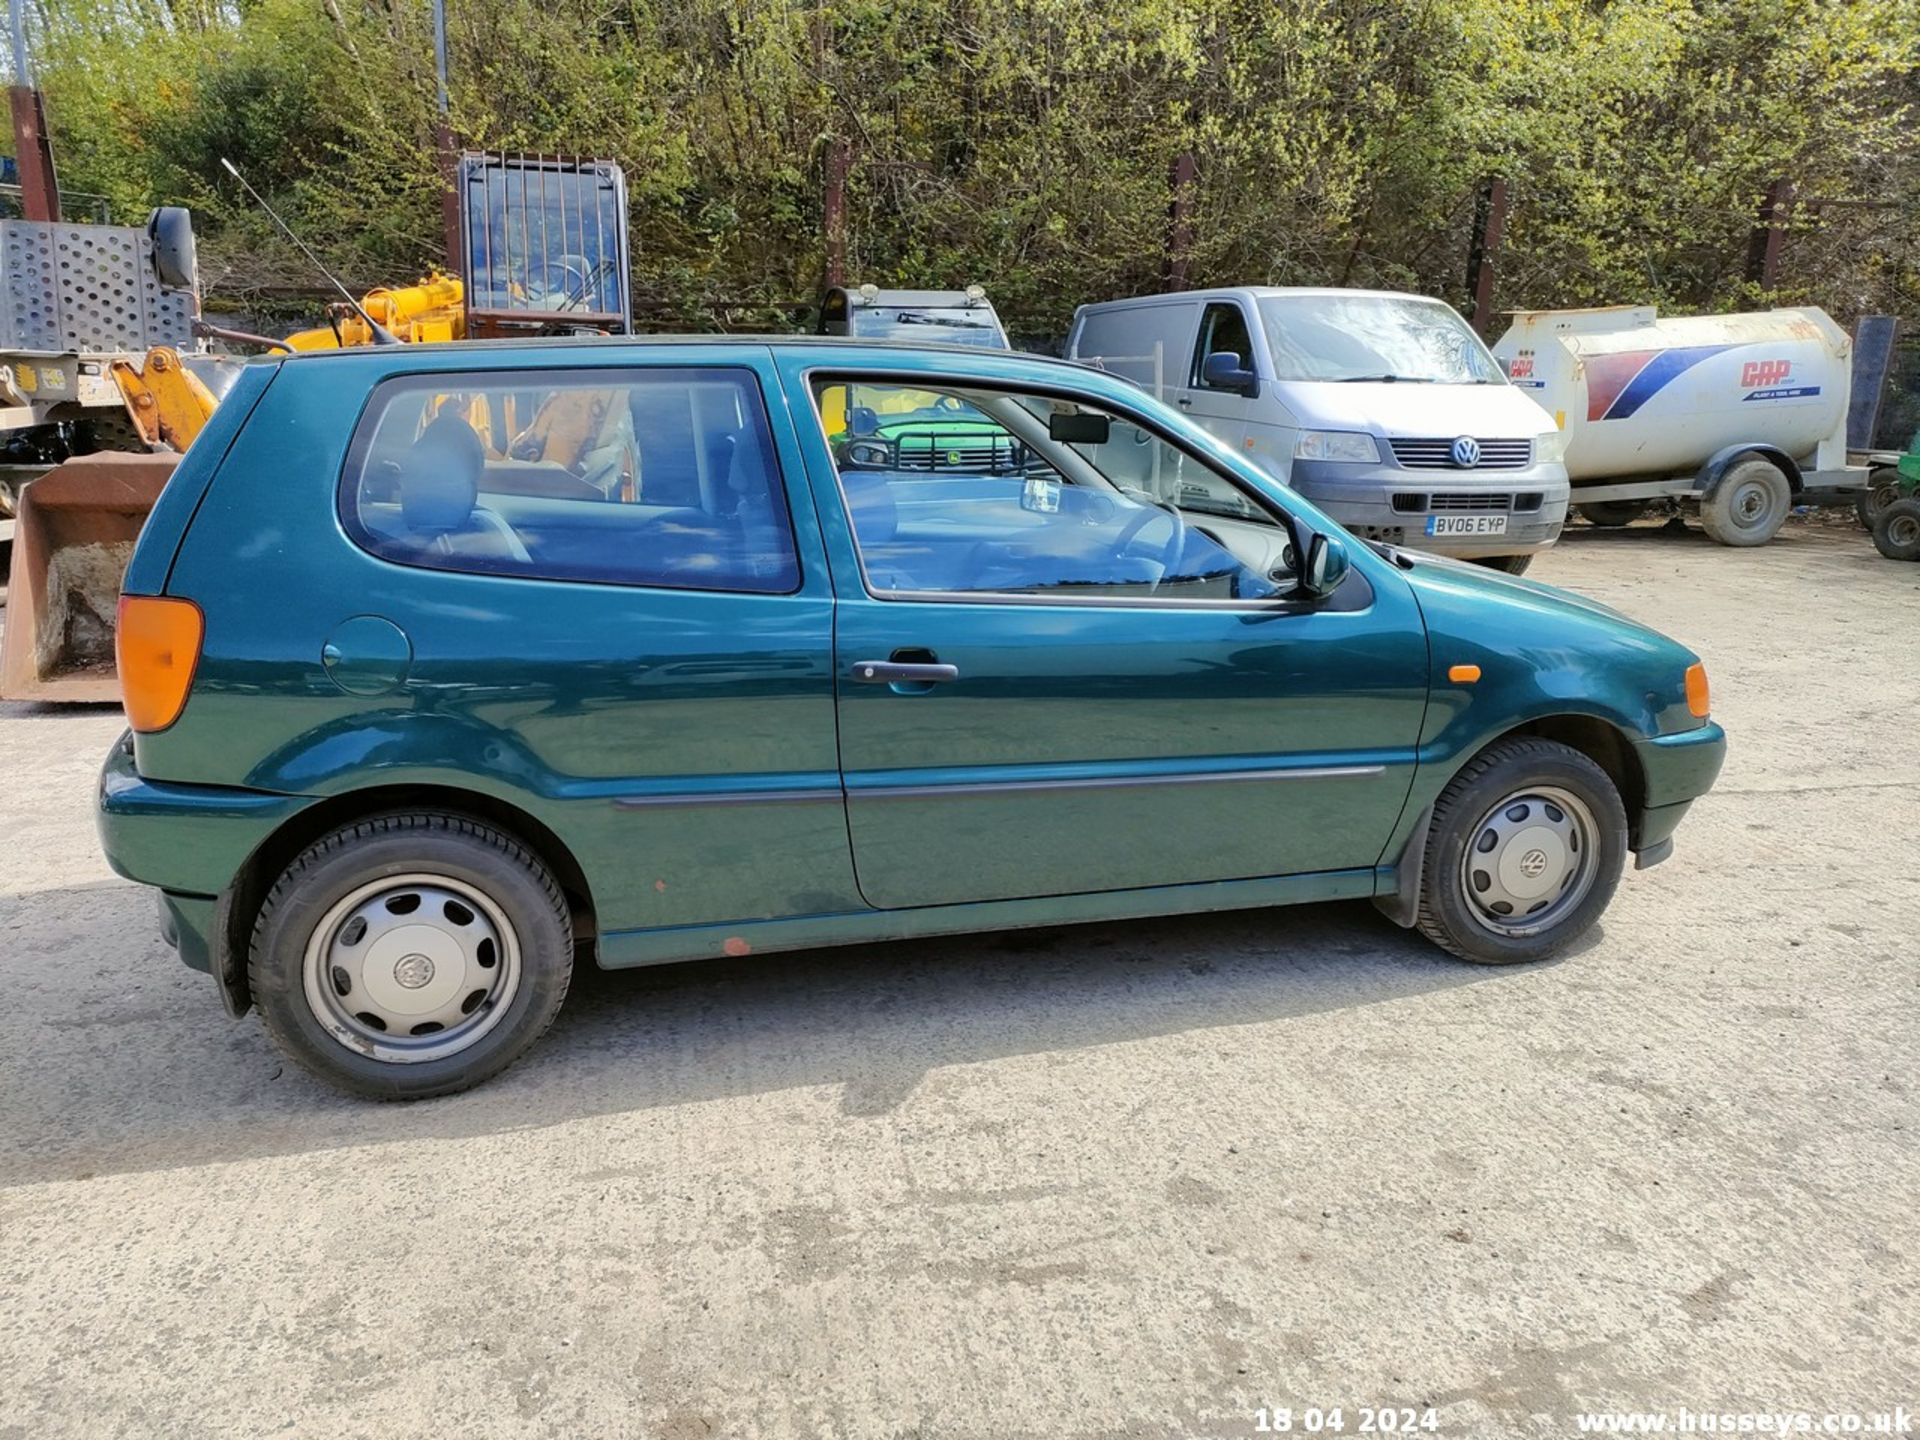 1997 VOLKSWAGEN POLO 1.4 CL AUTO - 1390cc 3dr Hatchback (Green, 68k) - Image 41 of 60